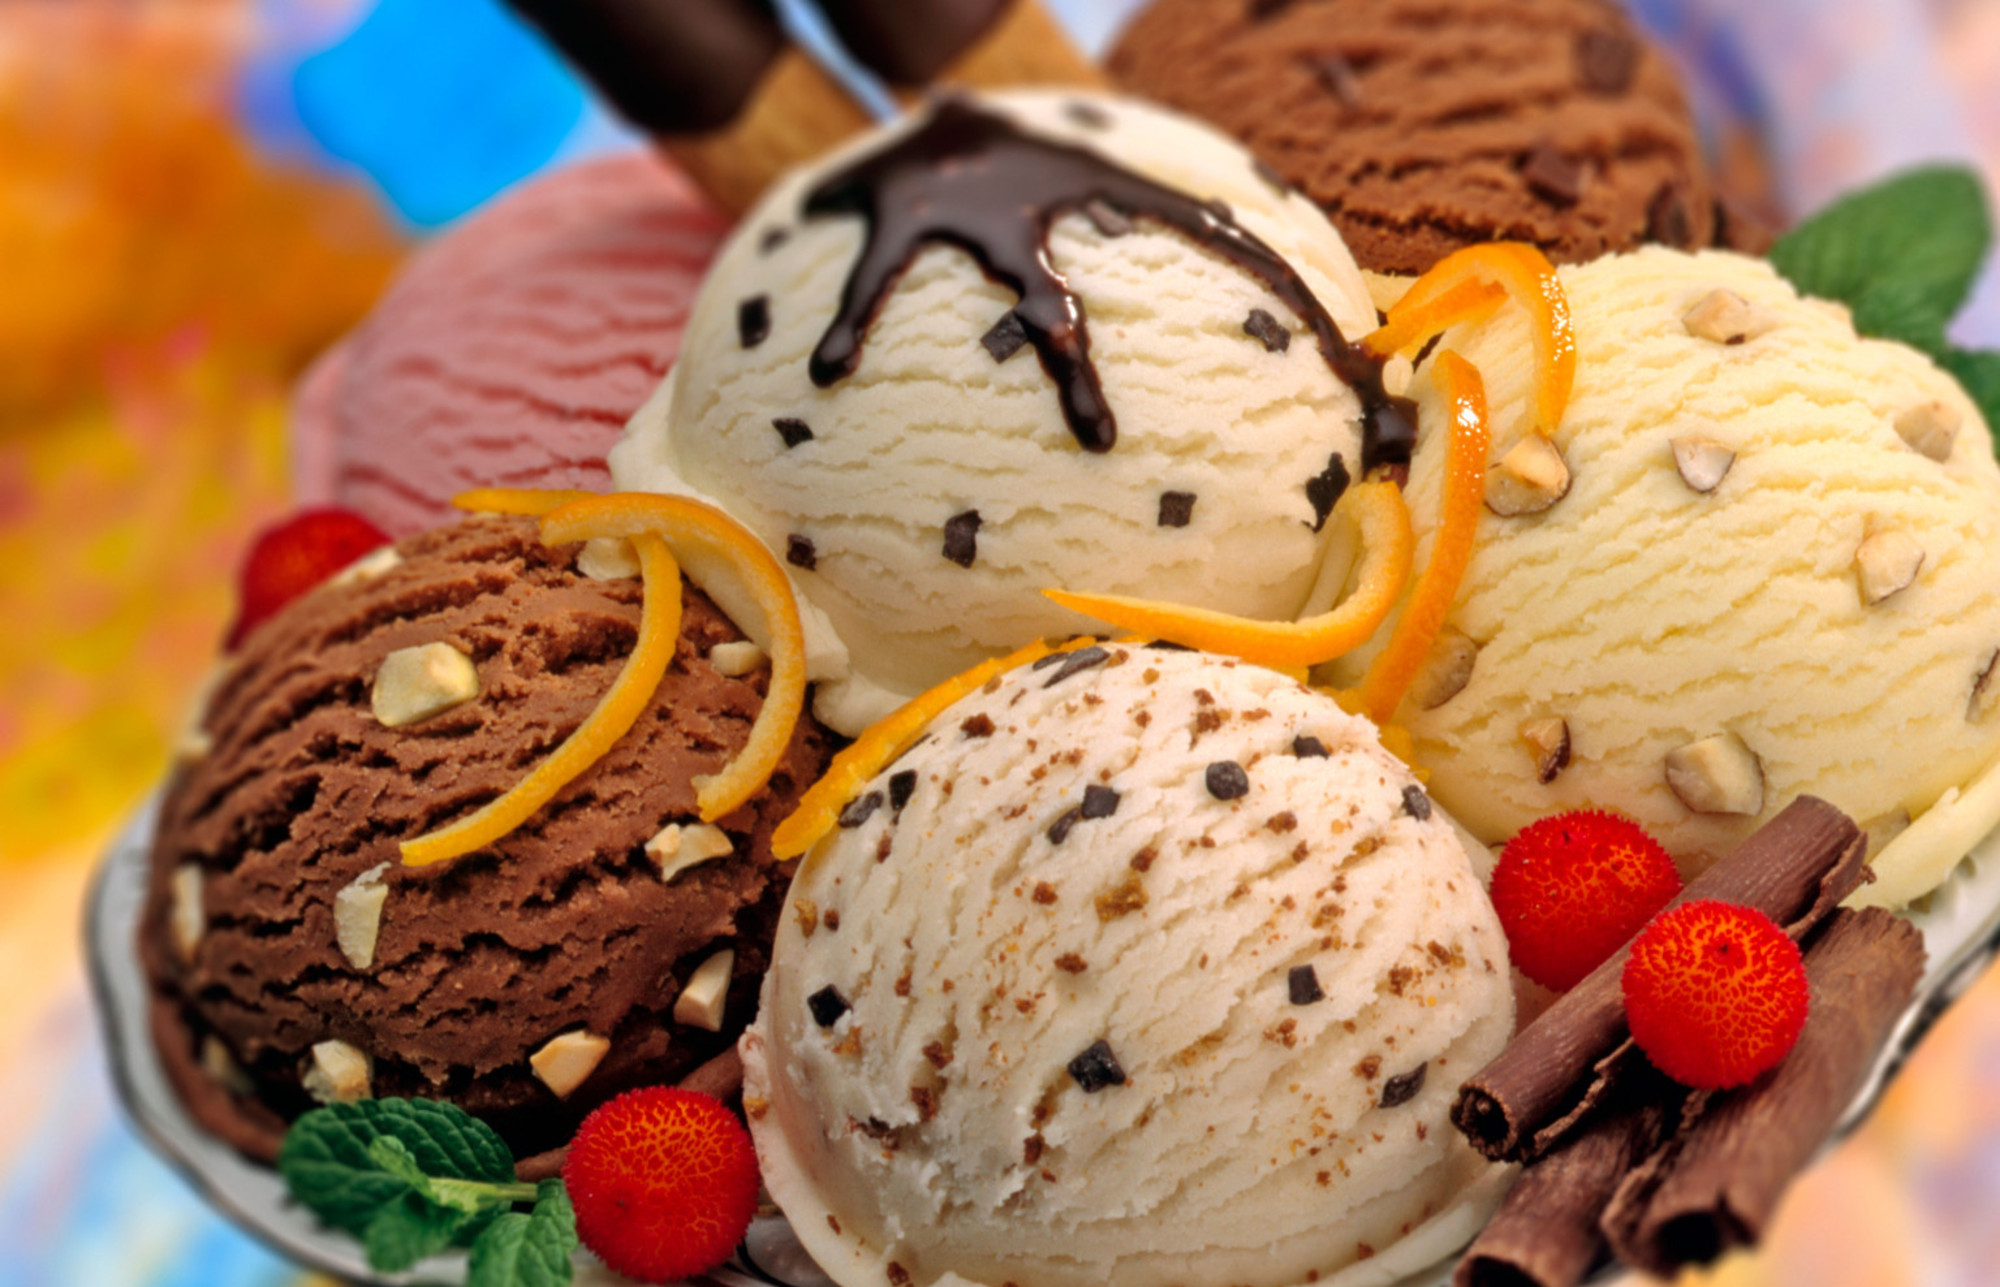 Hd Wallpaper - Ice Cream Images Hd , HD Wallpaper & Backgrounds